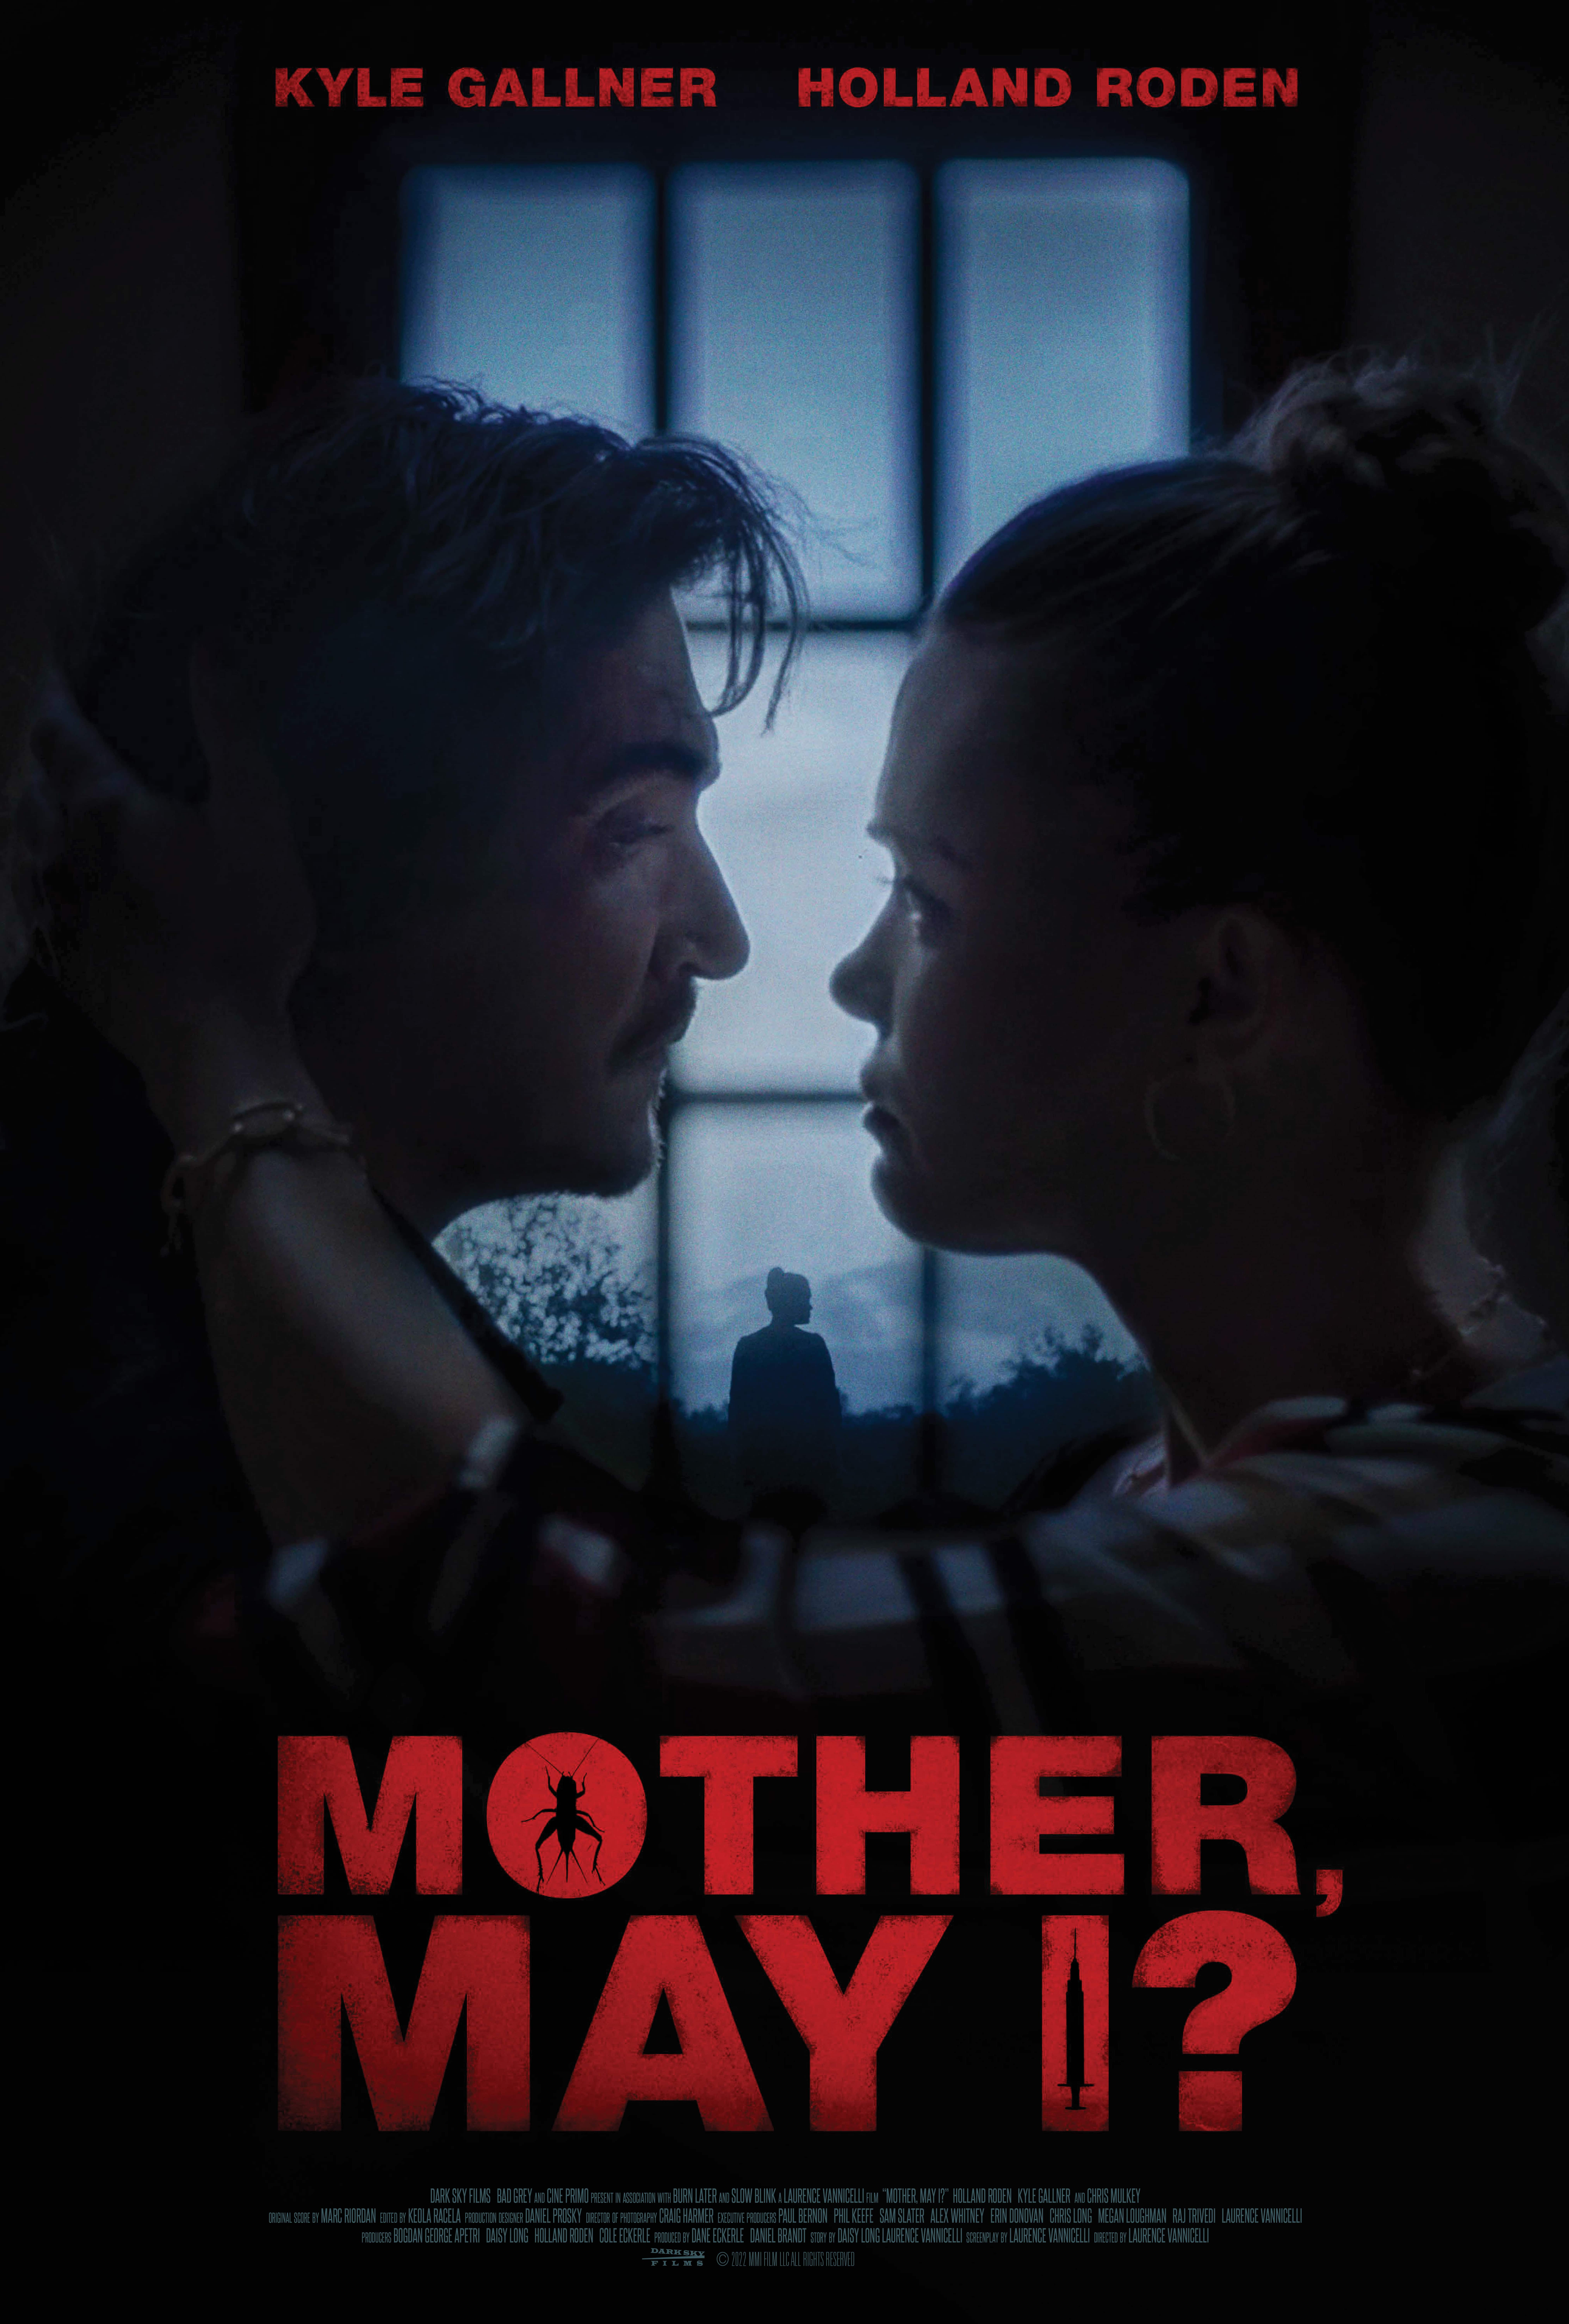 Mother, May I? - A Spine-Chilling Thriller Arriving Soon 28